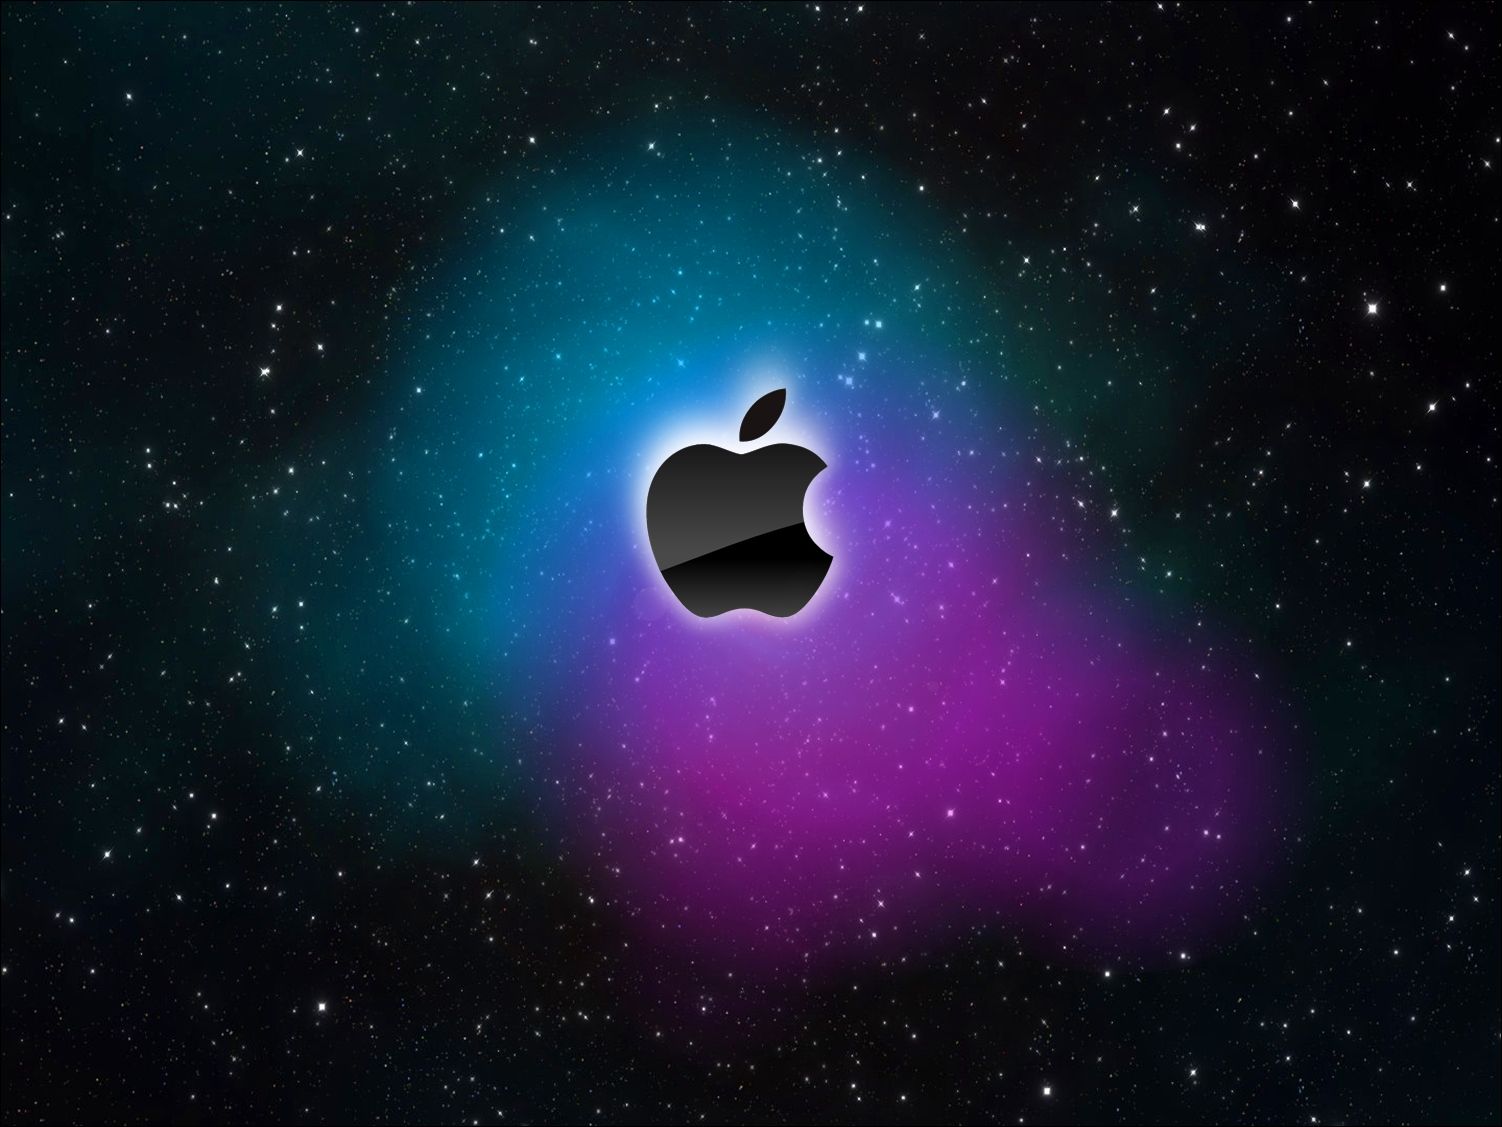 55 Classy and Elegant Apple WideScreen HD Wallpapers | Bloggs74